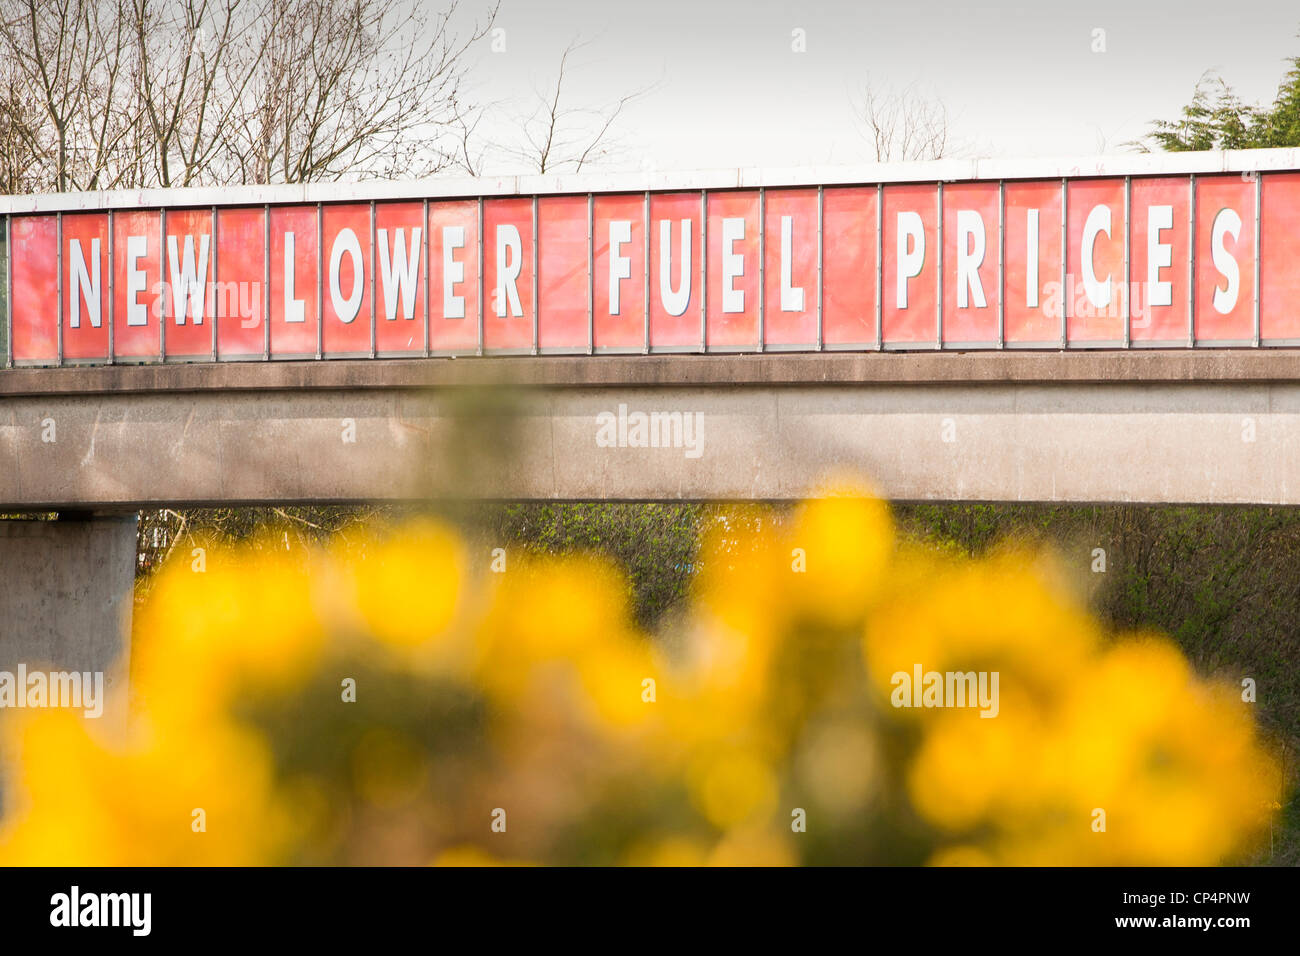 A sign for lower fuel prices at a motorway service station on the M6 motorway near Carlisle, Cumbria, UK. Stock Photo